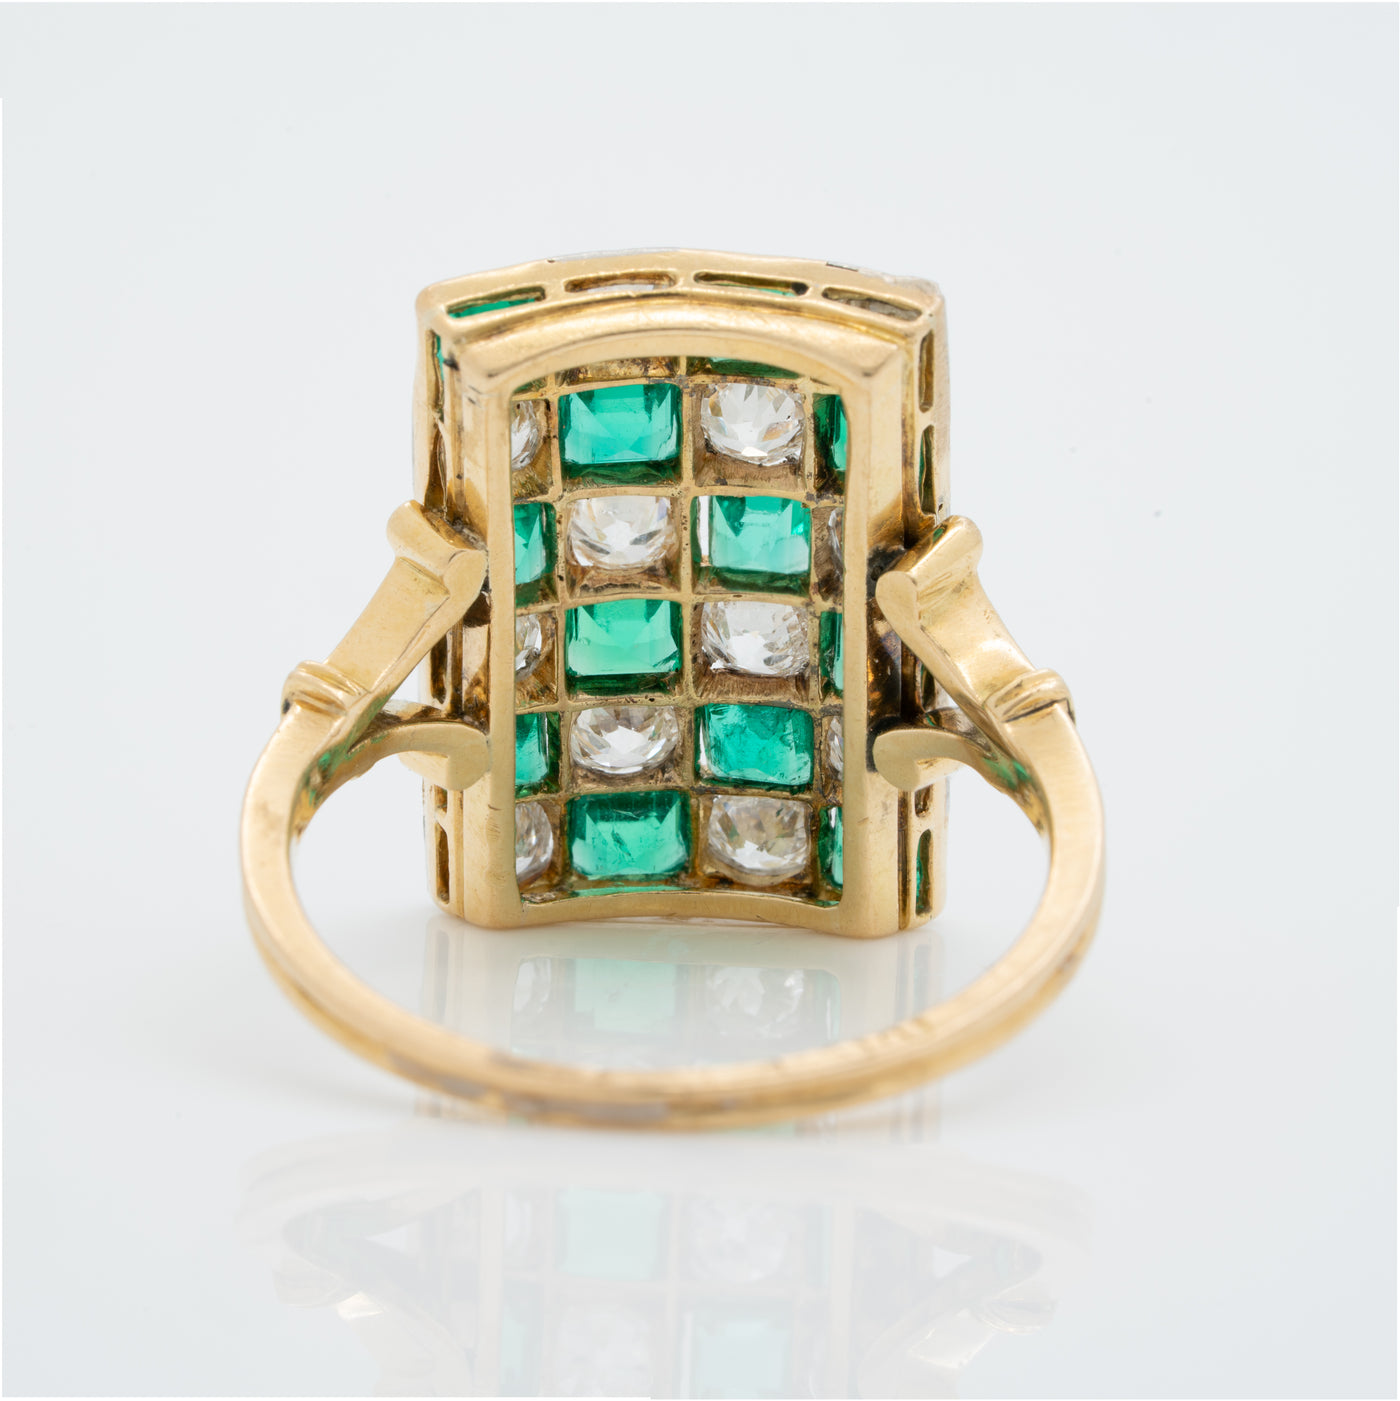 VICTORIAN 18K YELLOW GOLD and 1.8CT OLD EUROPEAN CUT DIAMOND AND 2.0CT COLOMBIAN EMERALD CHECKERBOARD PLAQUE RING c.1900